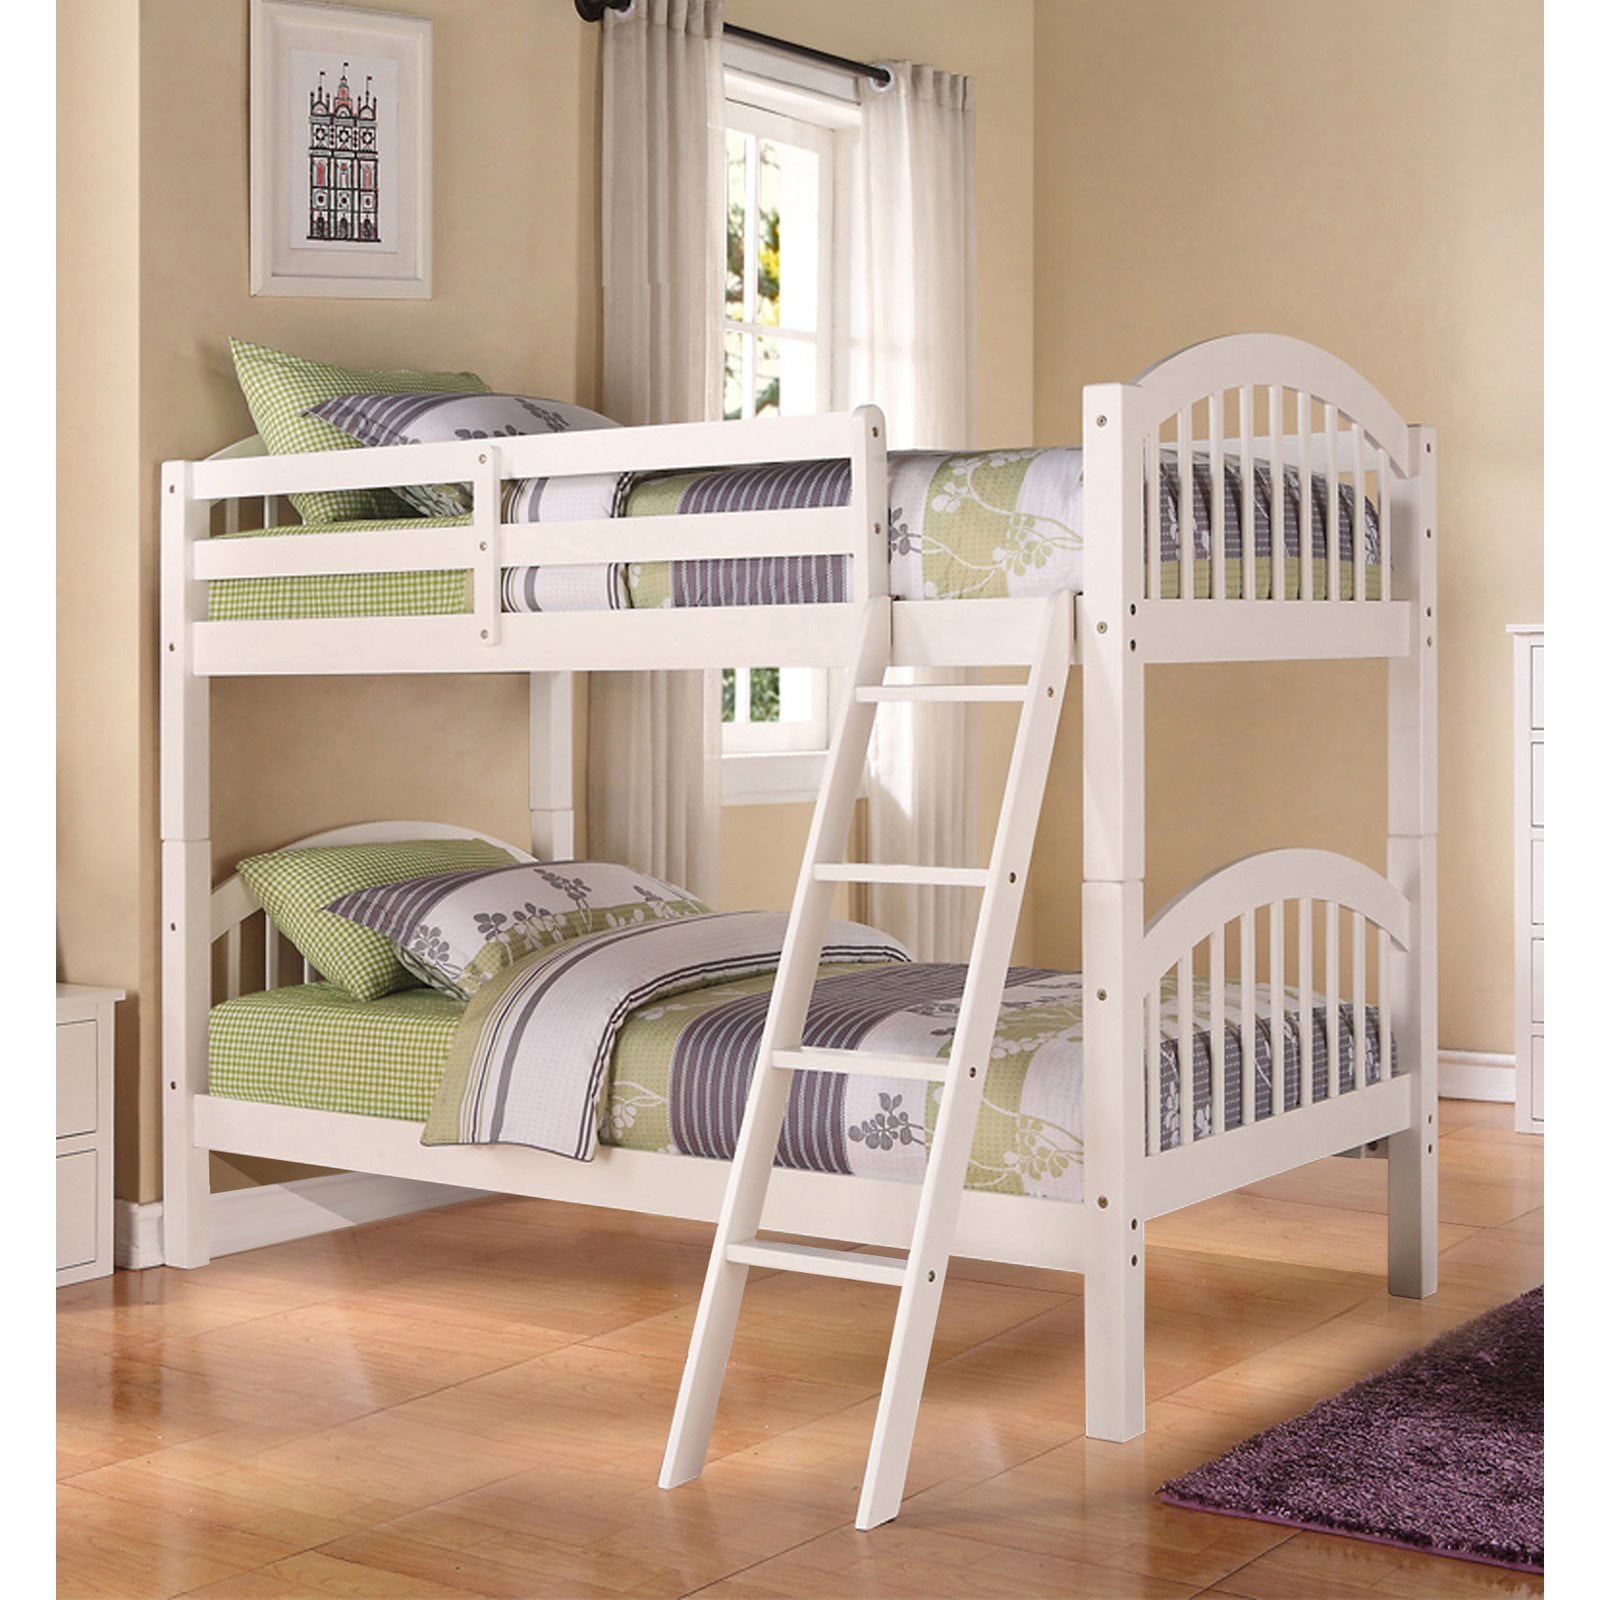 K Amp B Furniture B125b Arched Twin, Curacao Bunk Beds